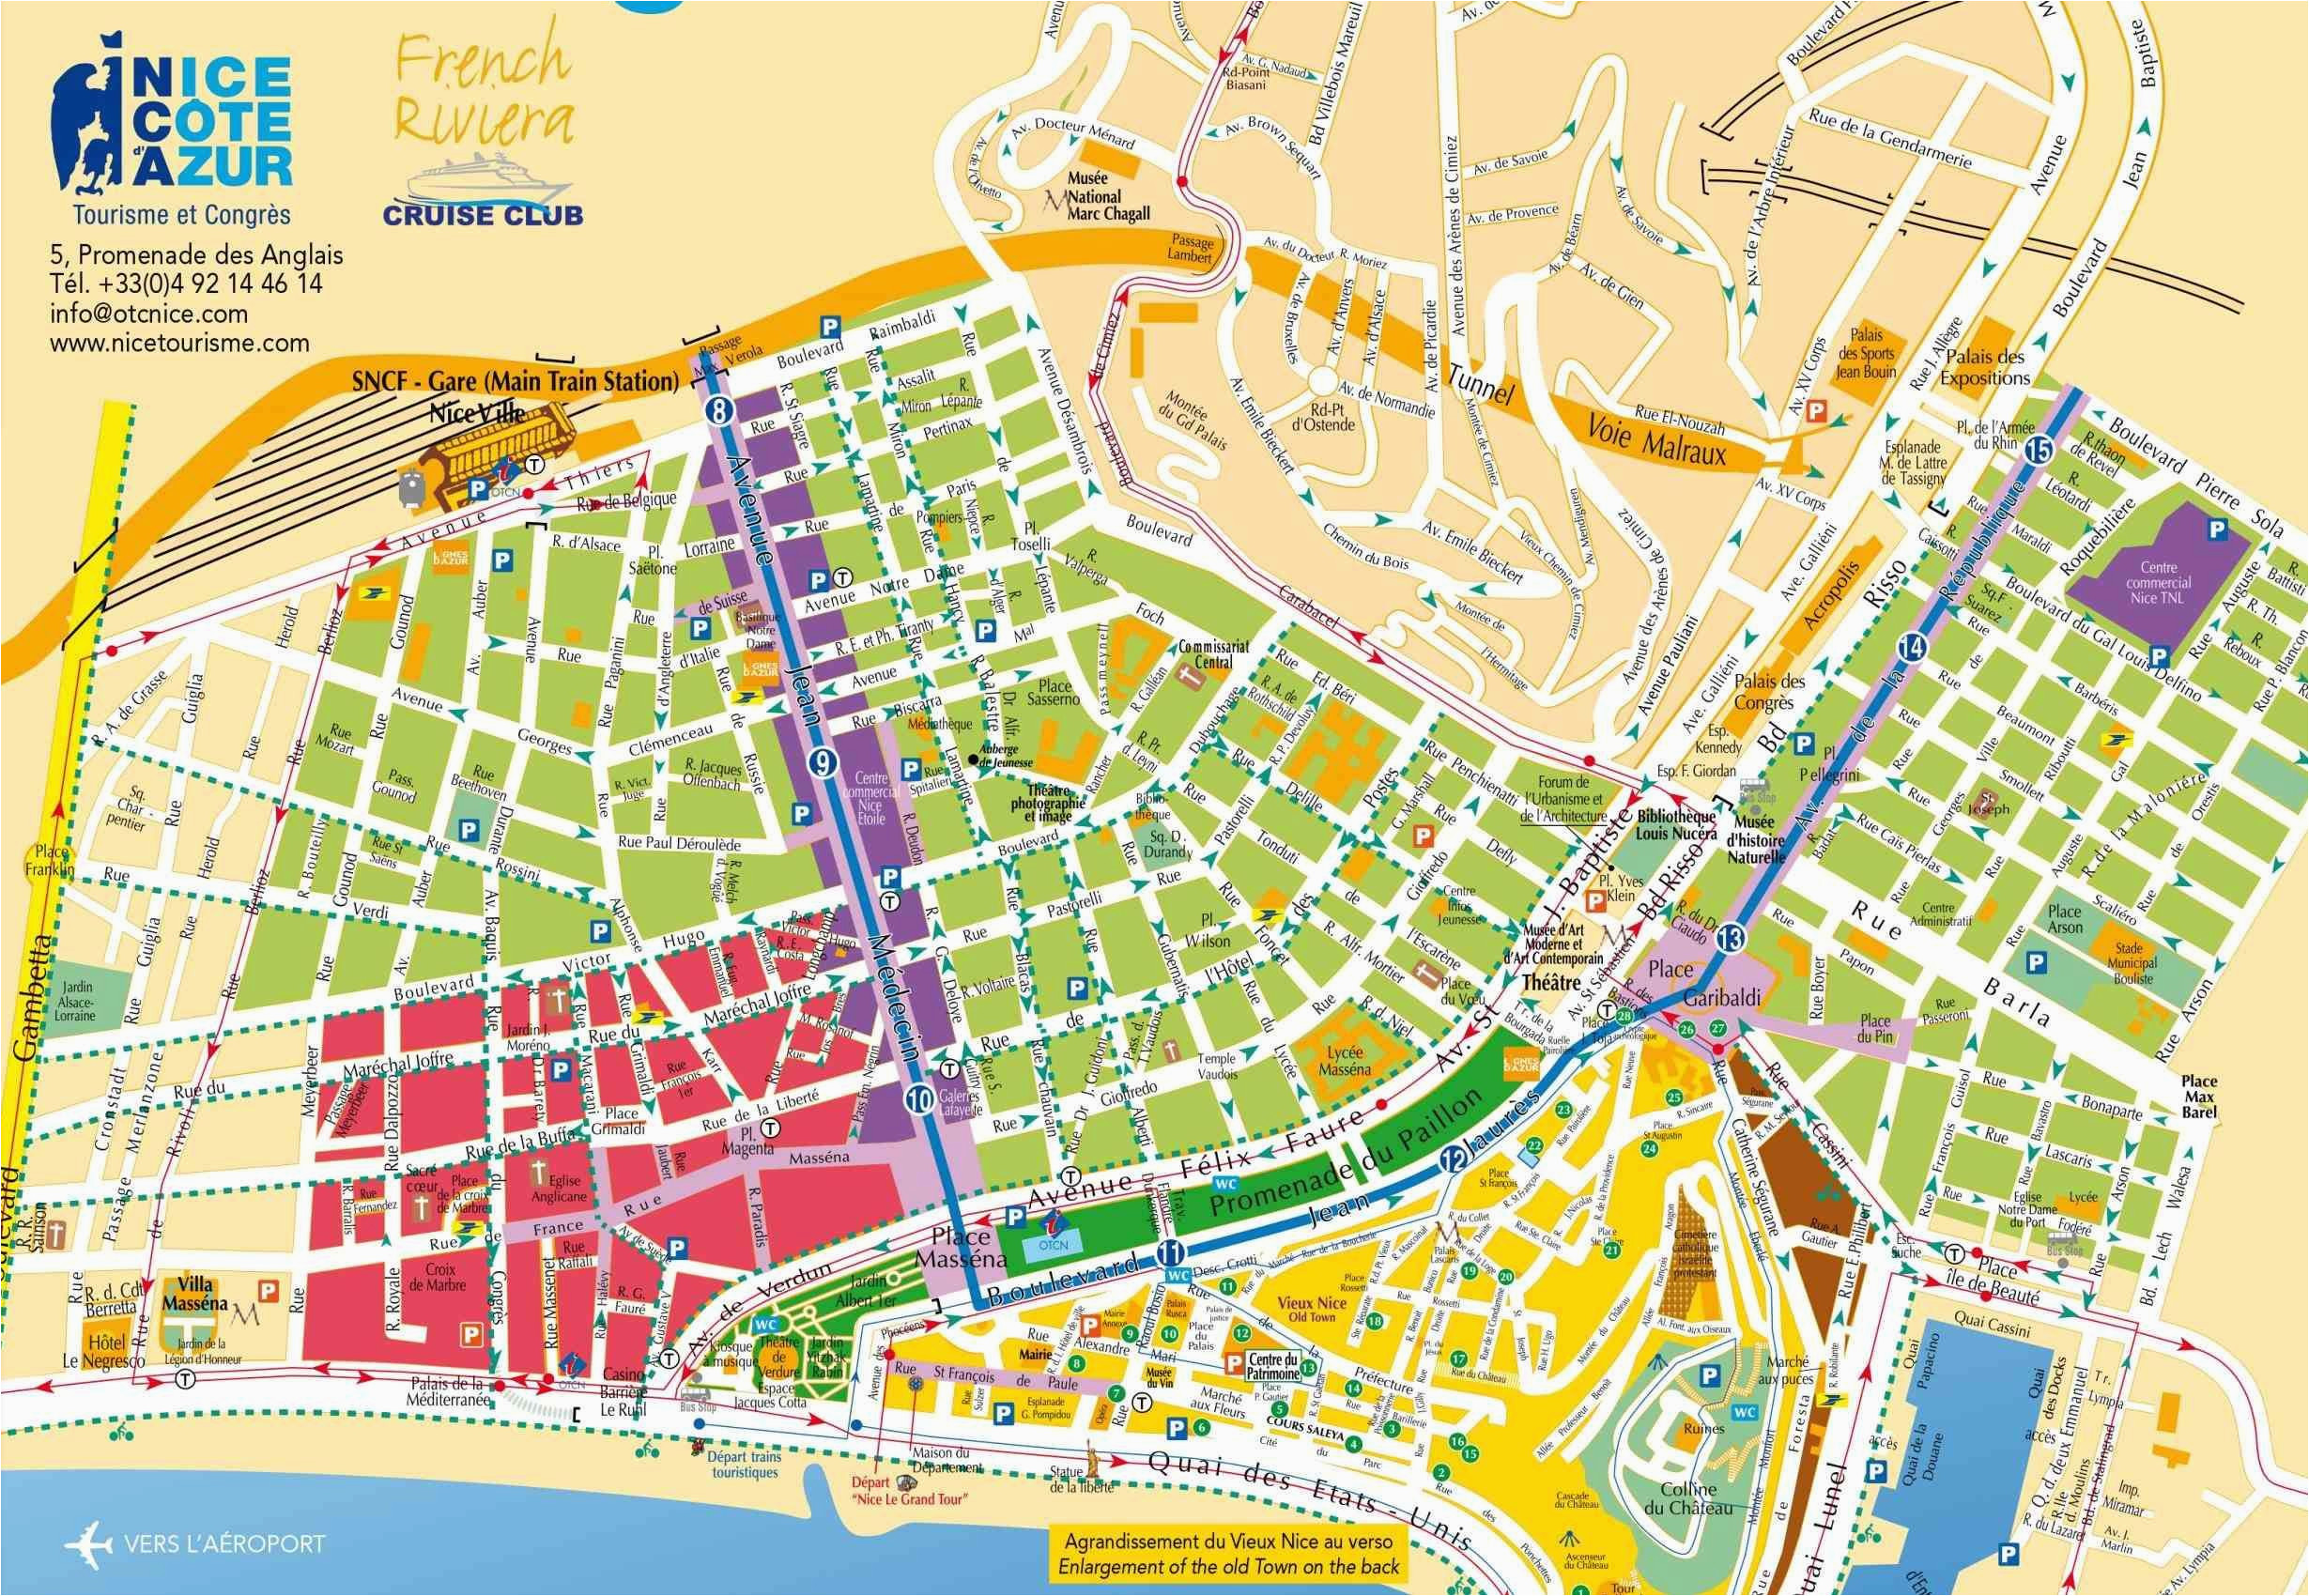 Google Maps Nice France Discover Map Of Nice France the top S Shortlisted for You by